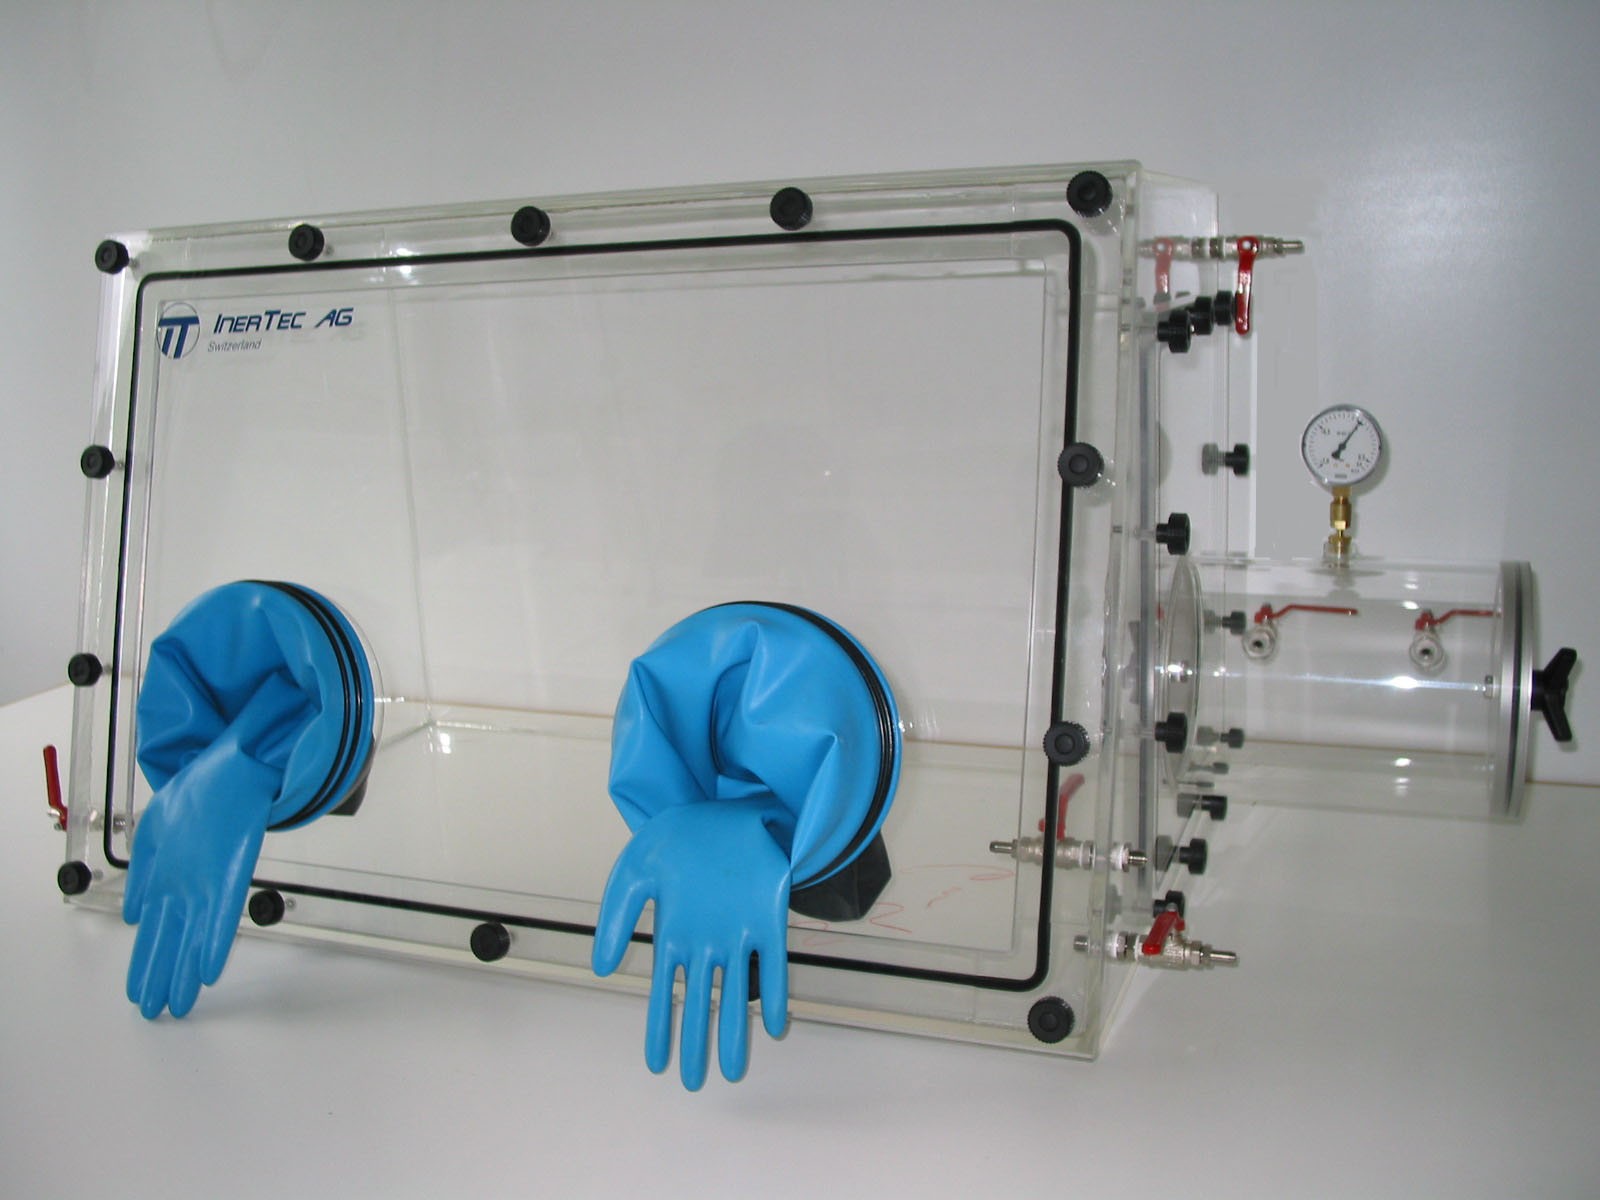 Glovebox made of acrylic&gt; Gas filling: automatic flushing with pressure control, front version: swivels upwards, side version: round vacuum lock, control: oxygen regulator and humidity display with data logger